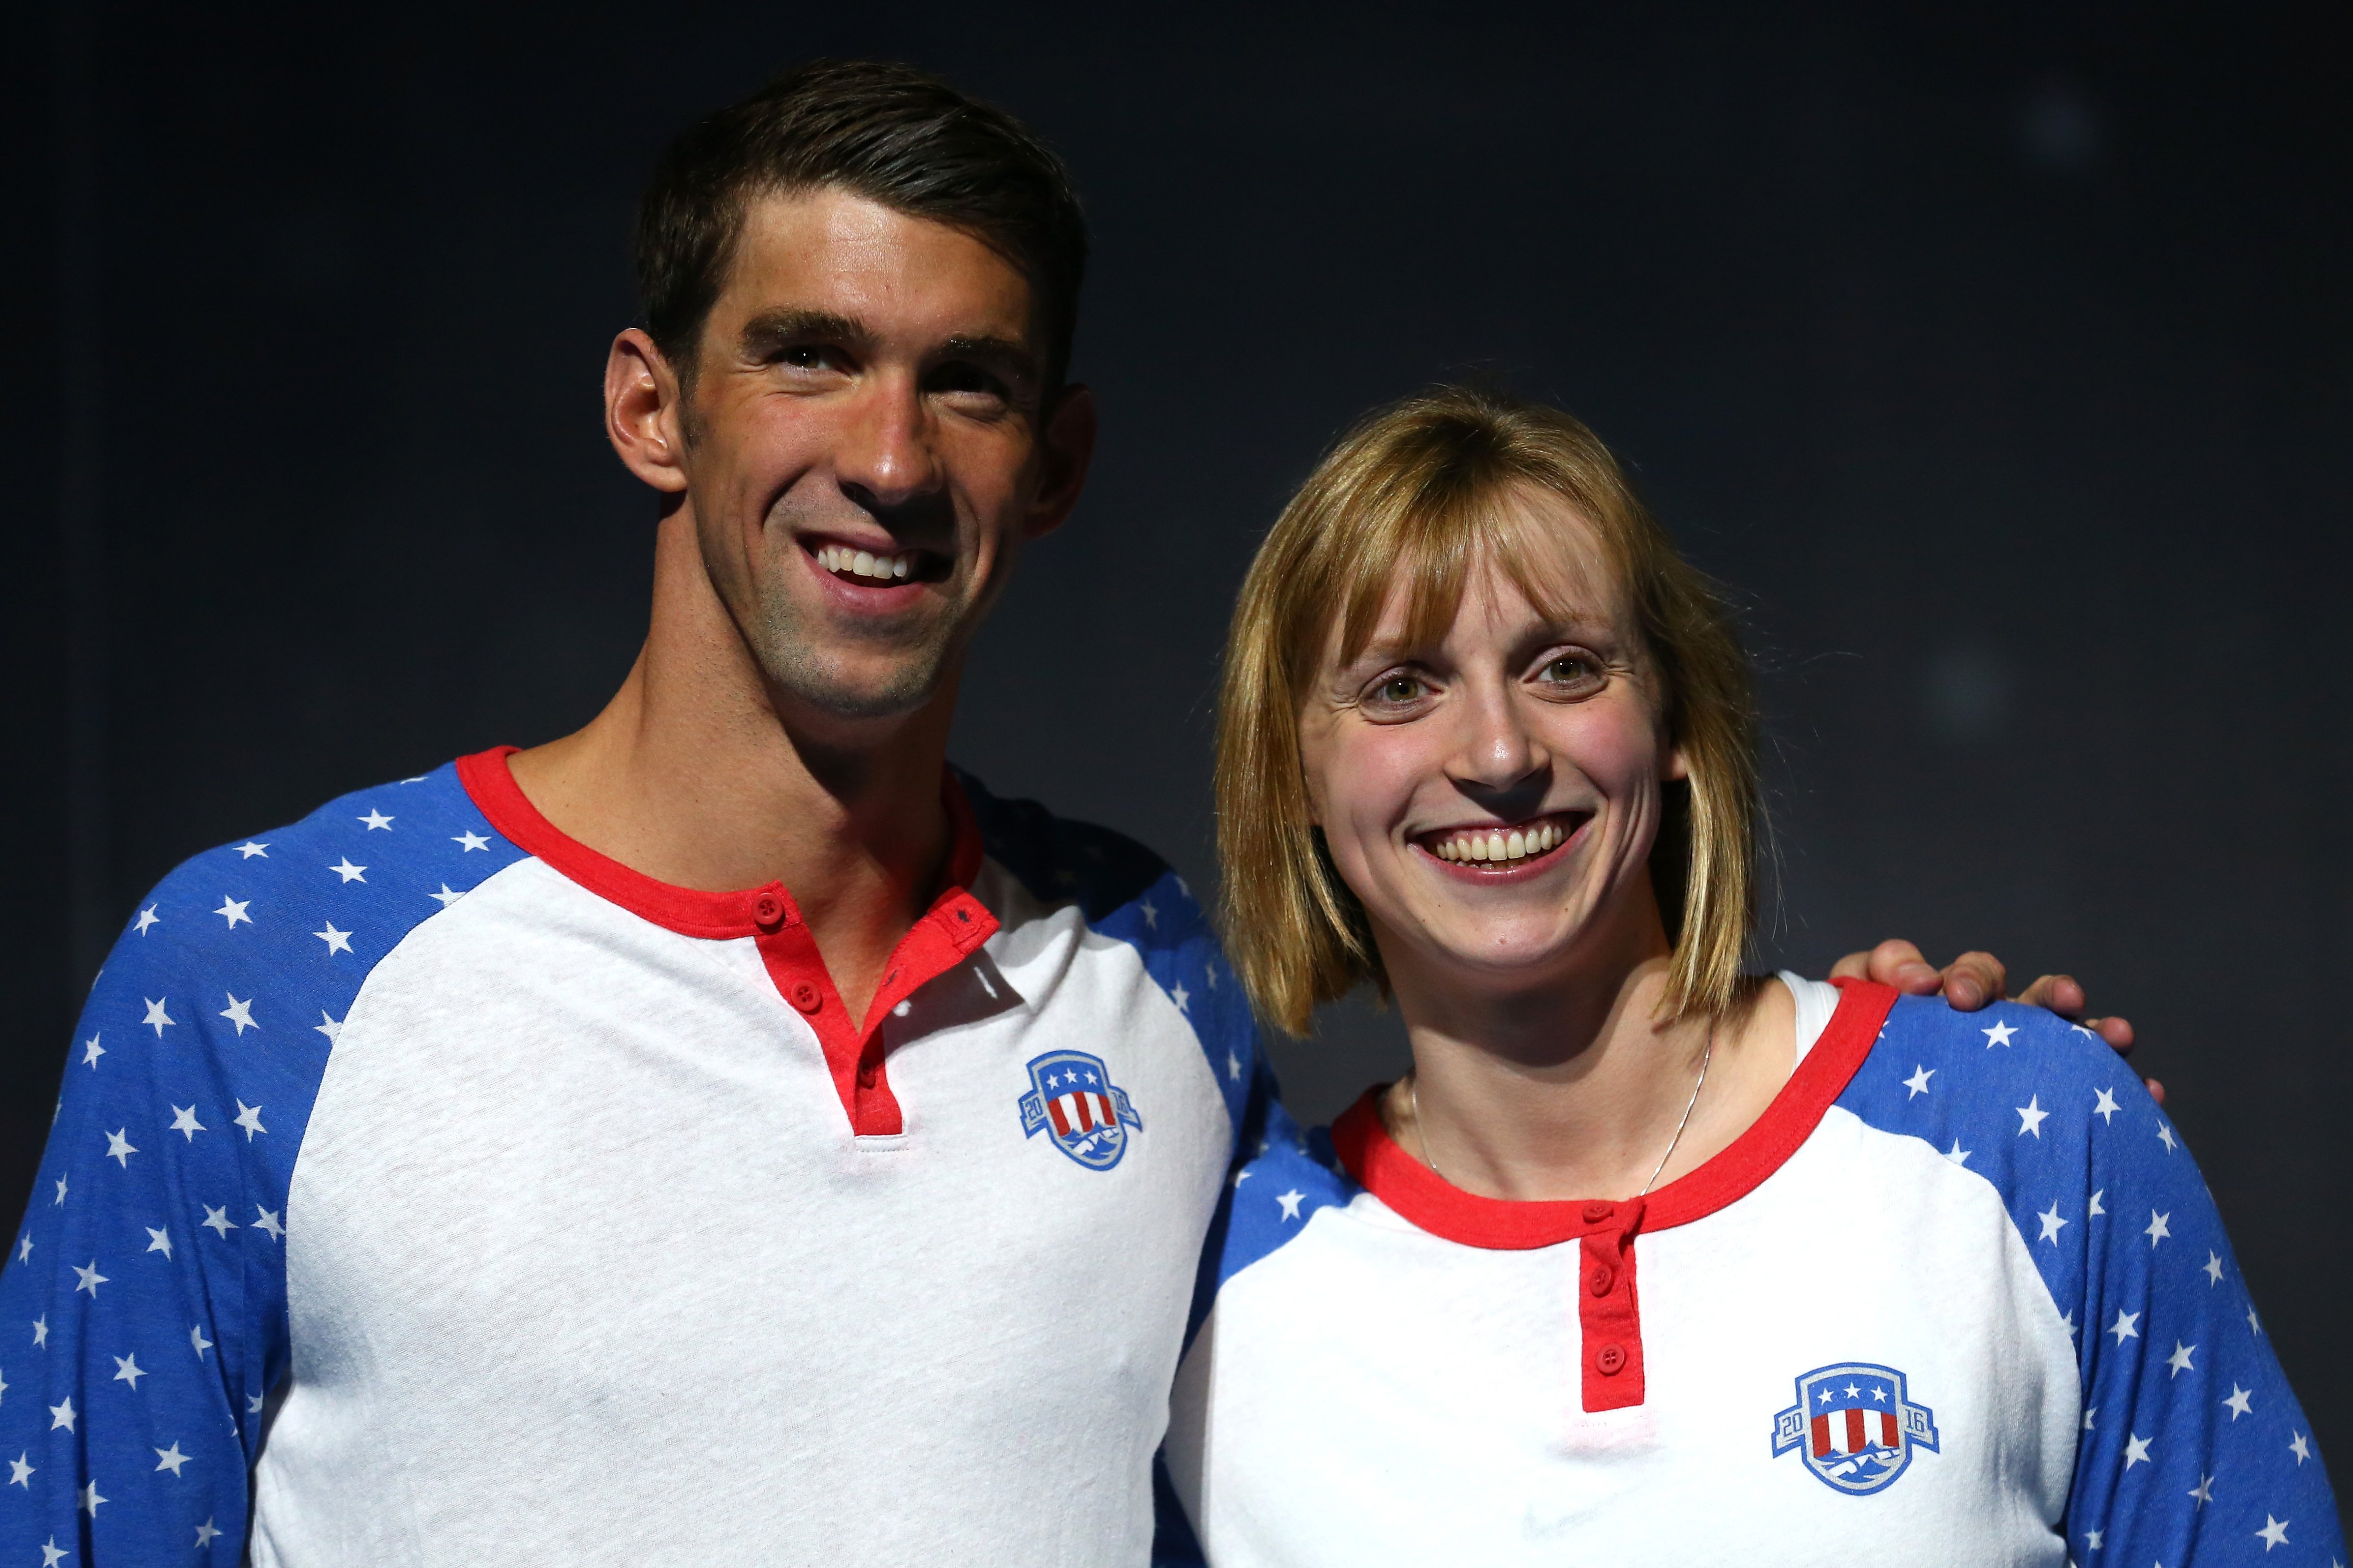 Michael Phelps and Katie Ledecky of the United States celebrate during Day Eight of the 2016 U.S. Olympic Team Swimming Trials at CenturyLink Center on July 3, 2016 in Omaha, Nebraska. (Tom Pennington-Getty Images)